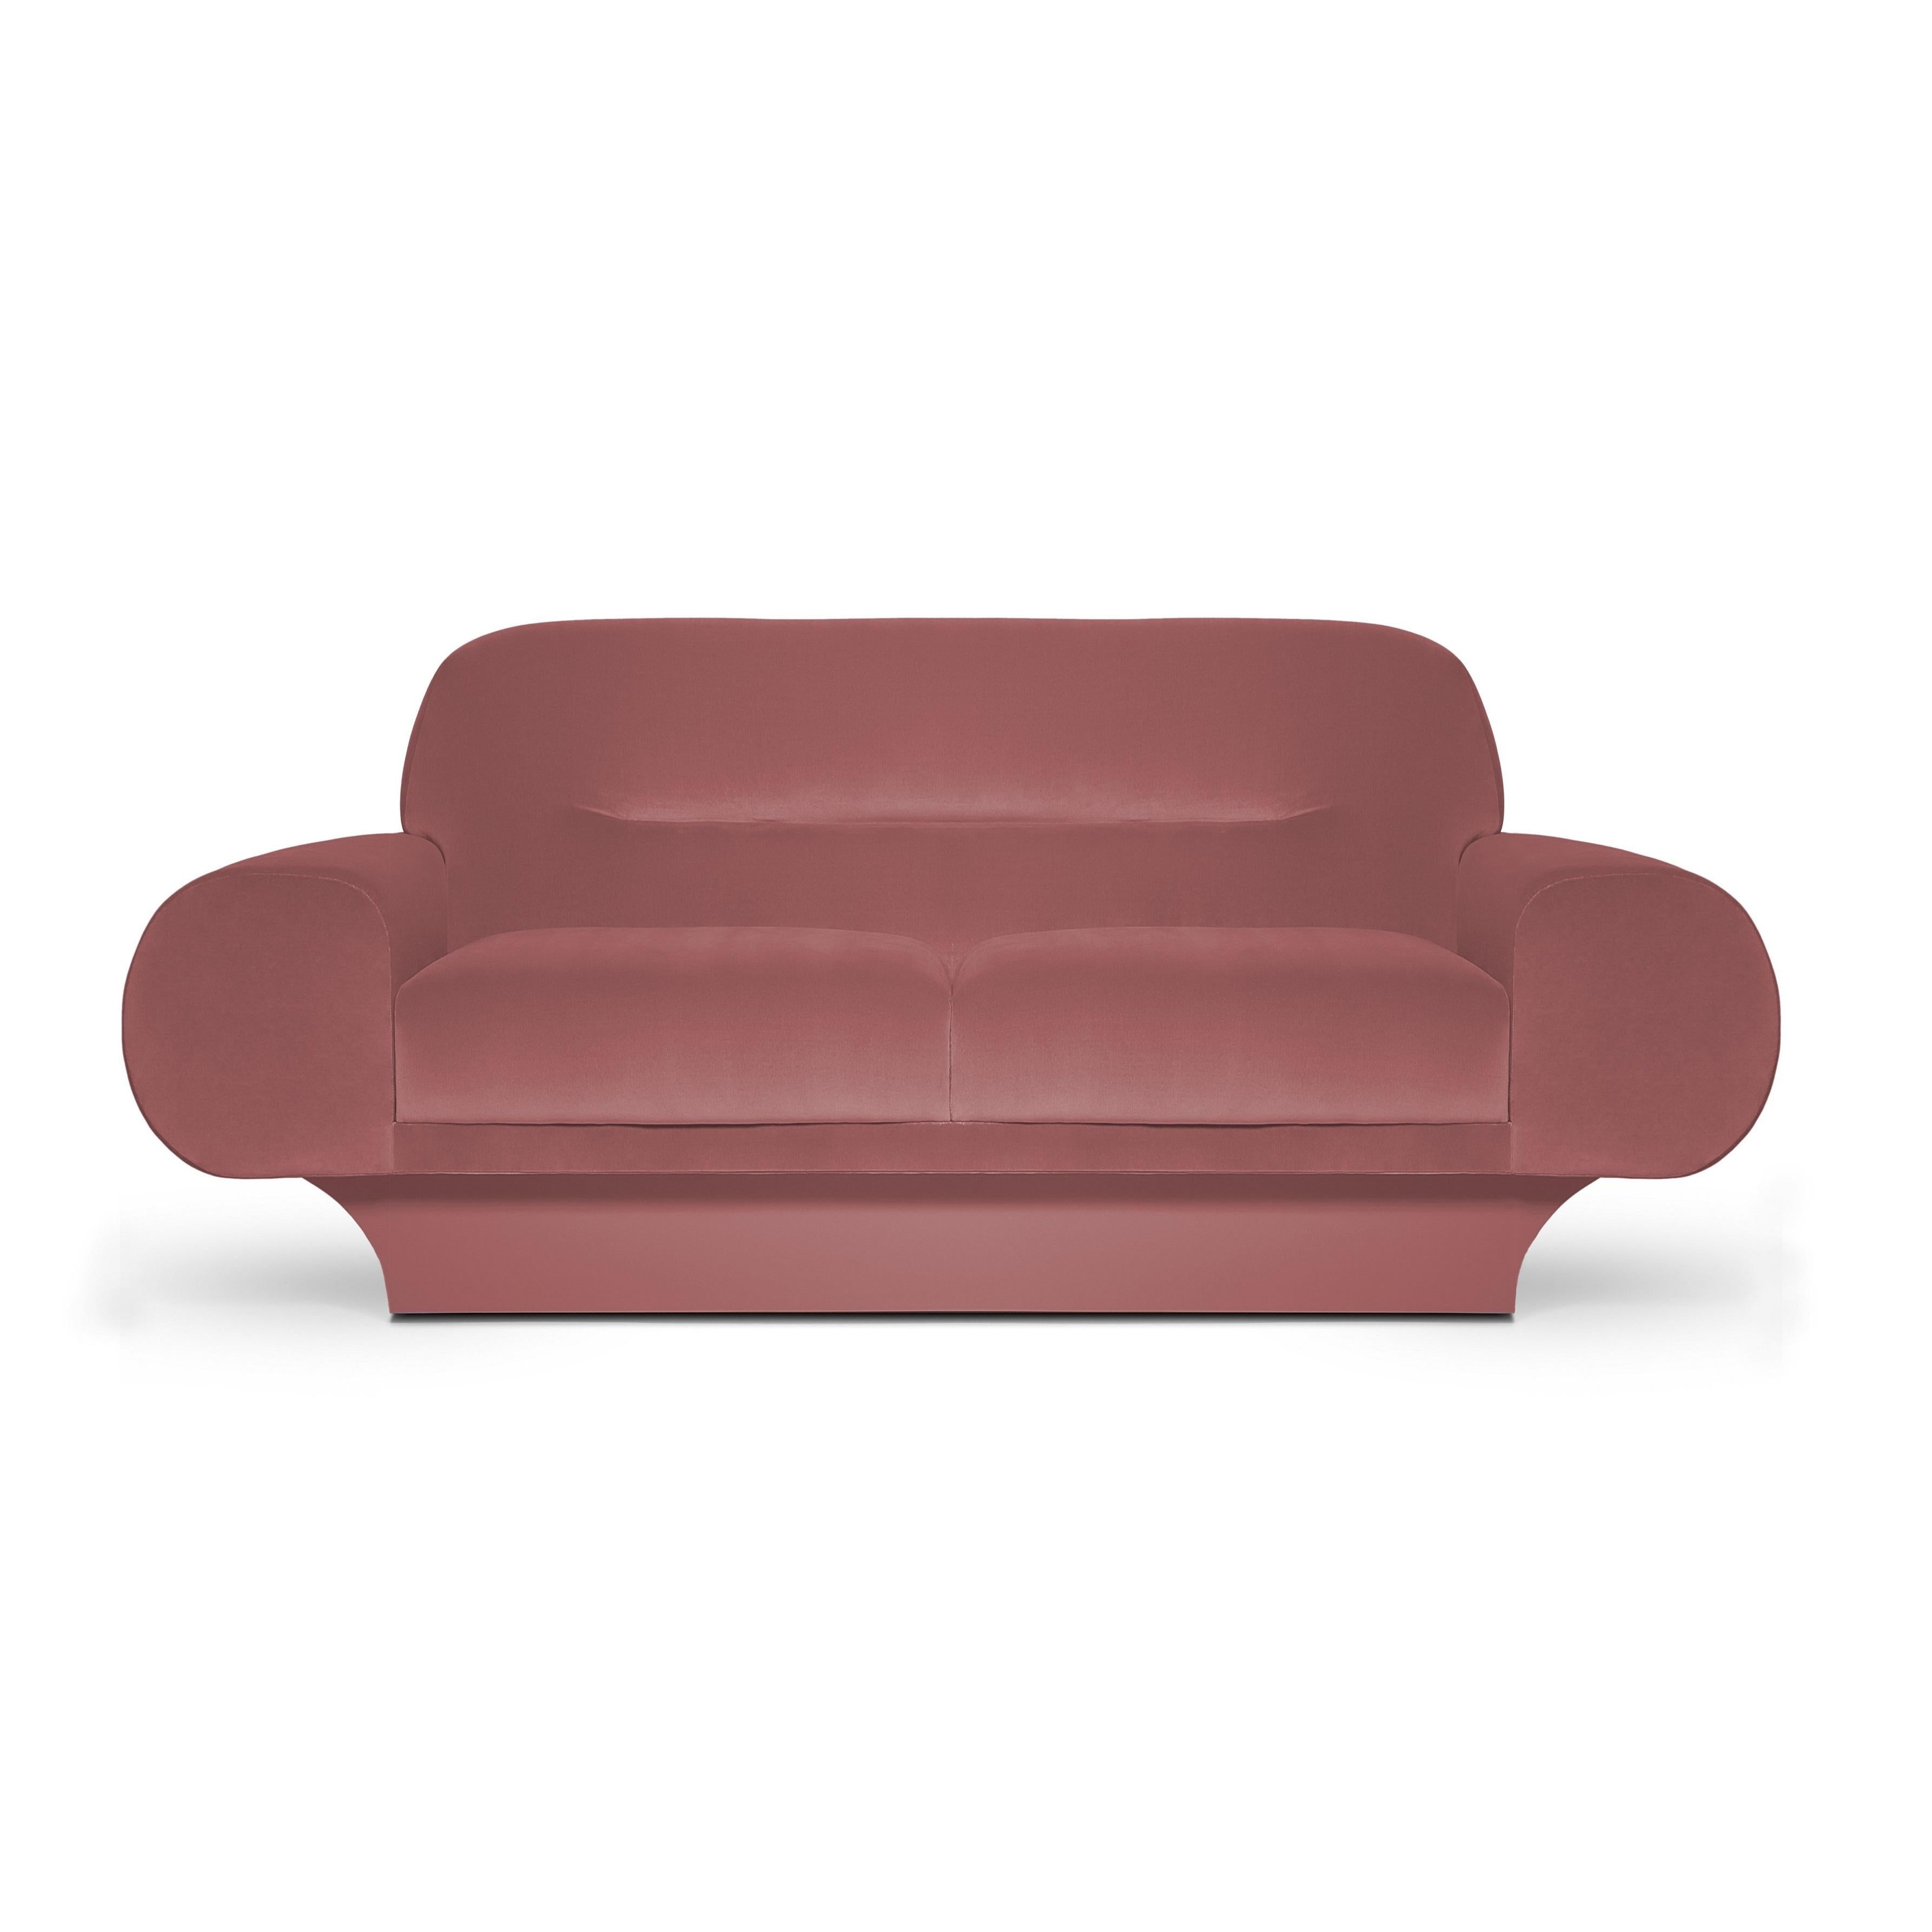 Hand-Crafted Retro Style Velvet Sofa W/Oversized Curvy Arms For Sale